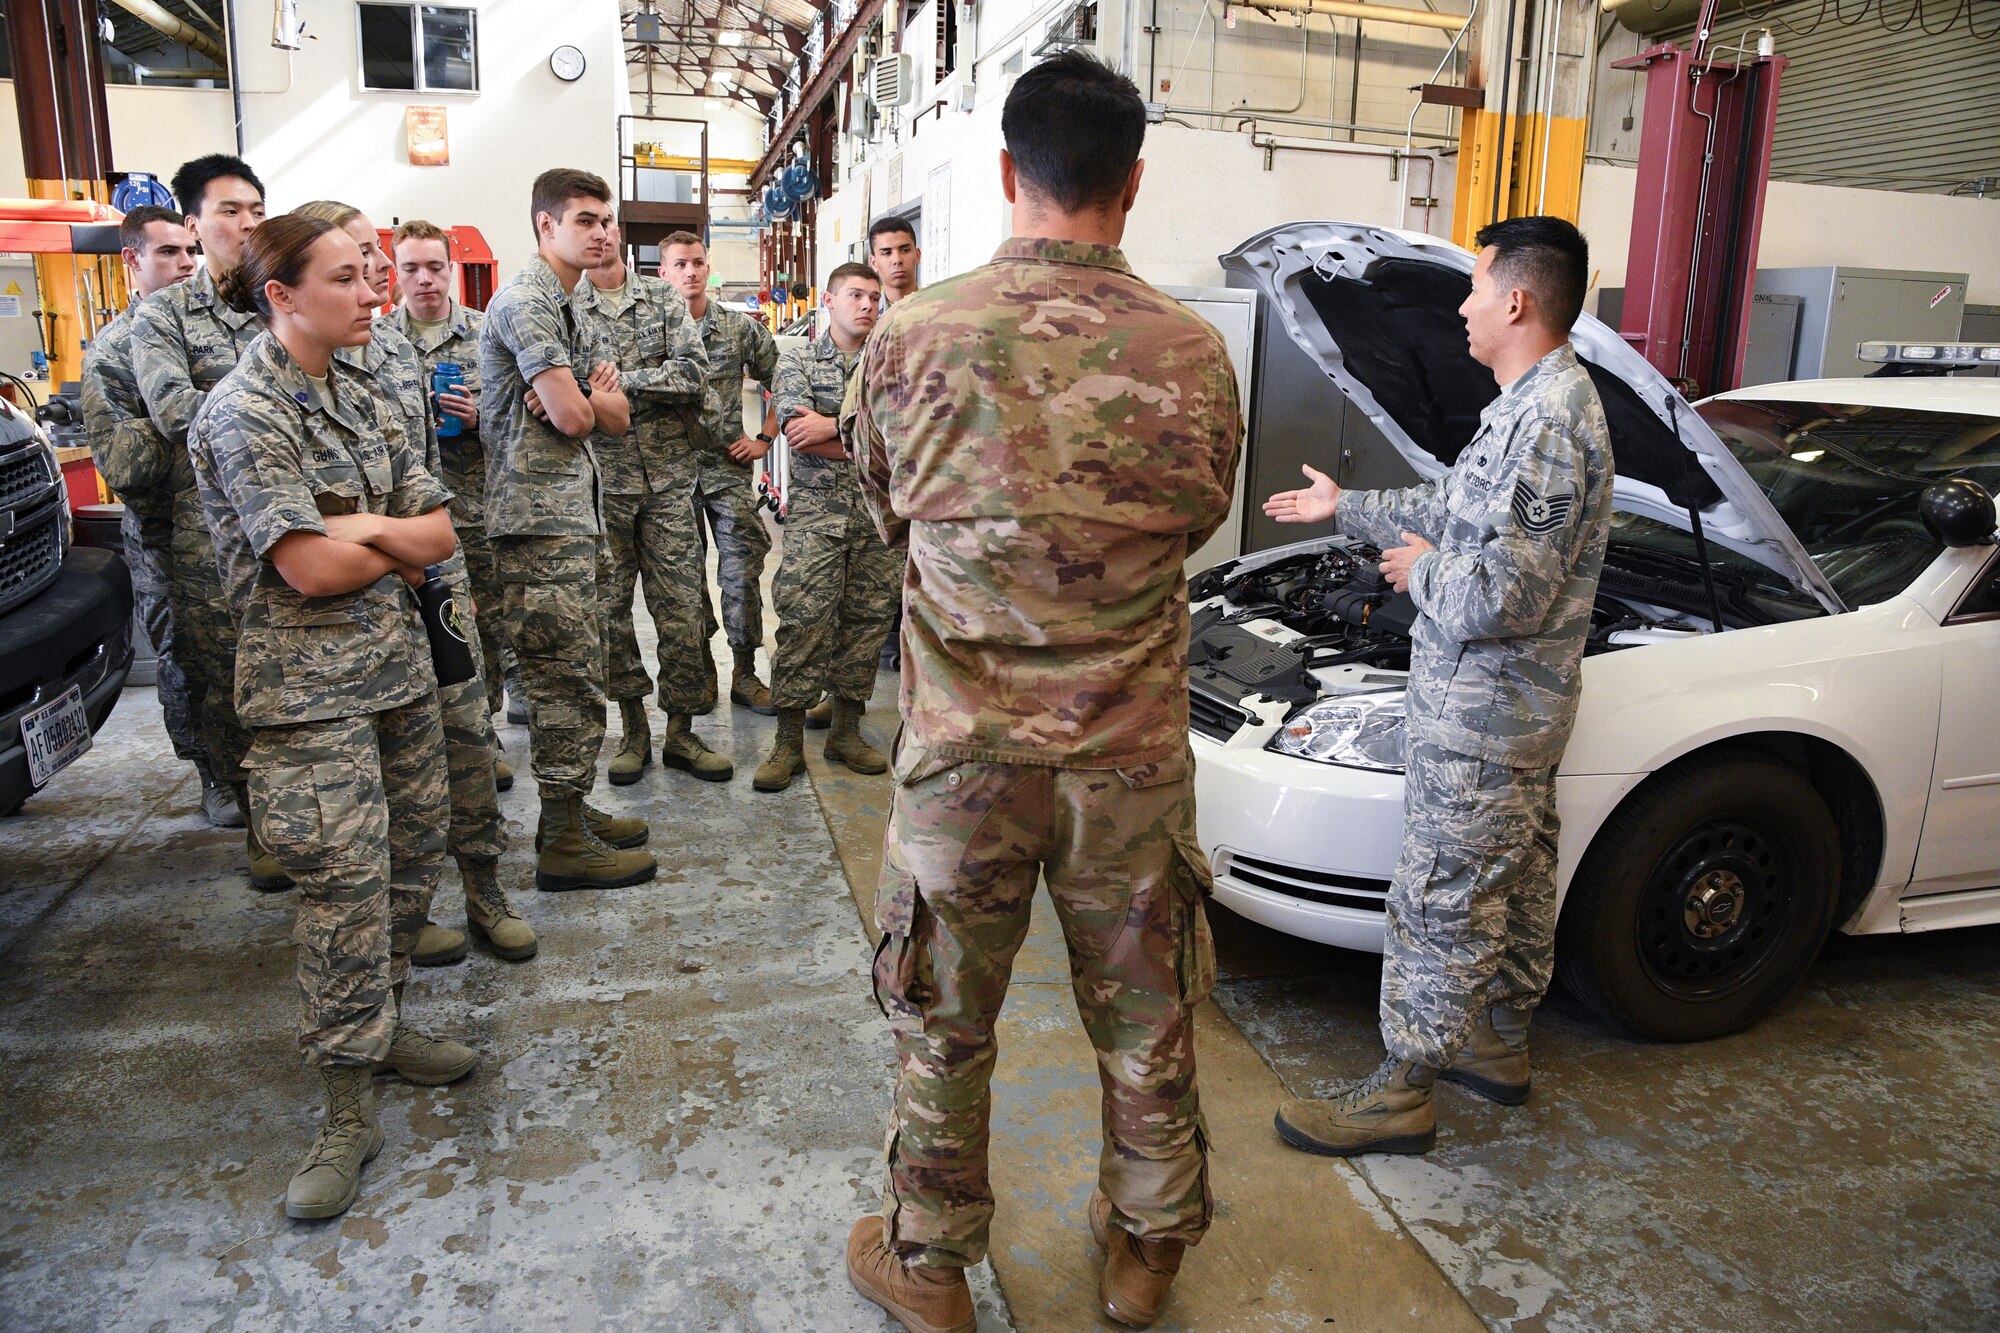 Tech. Sgt. Benjamin Erwin, 75th Logistics Readiness Squadron vehicle maintenance, speaks to Air Force ROTC cadets during a tour of Hill Air Force Base, Utah, July 24, 2019. Over 80 cadets visited Hill as part of a professional development training program called Operation Air Force. The program gives cadets a greater understanding of the Air Force while introducing them to a variety of careers fields. (U.S. Air Force photo by R. Nial Bradshaw)